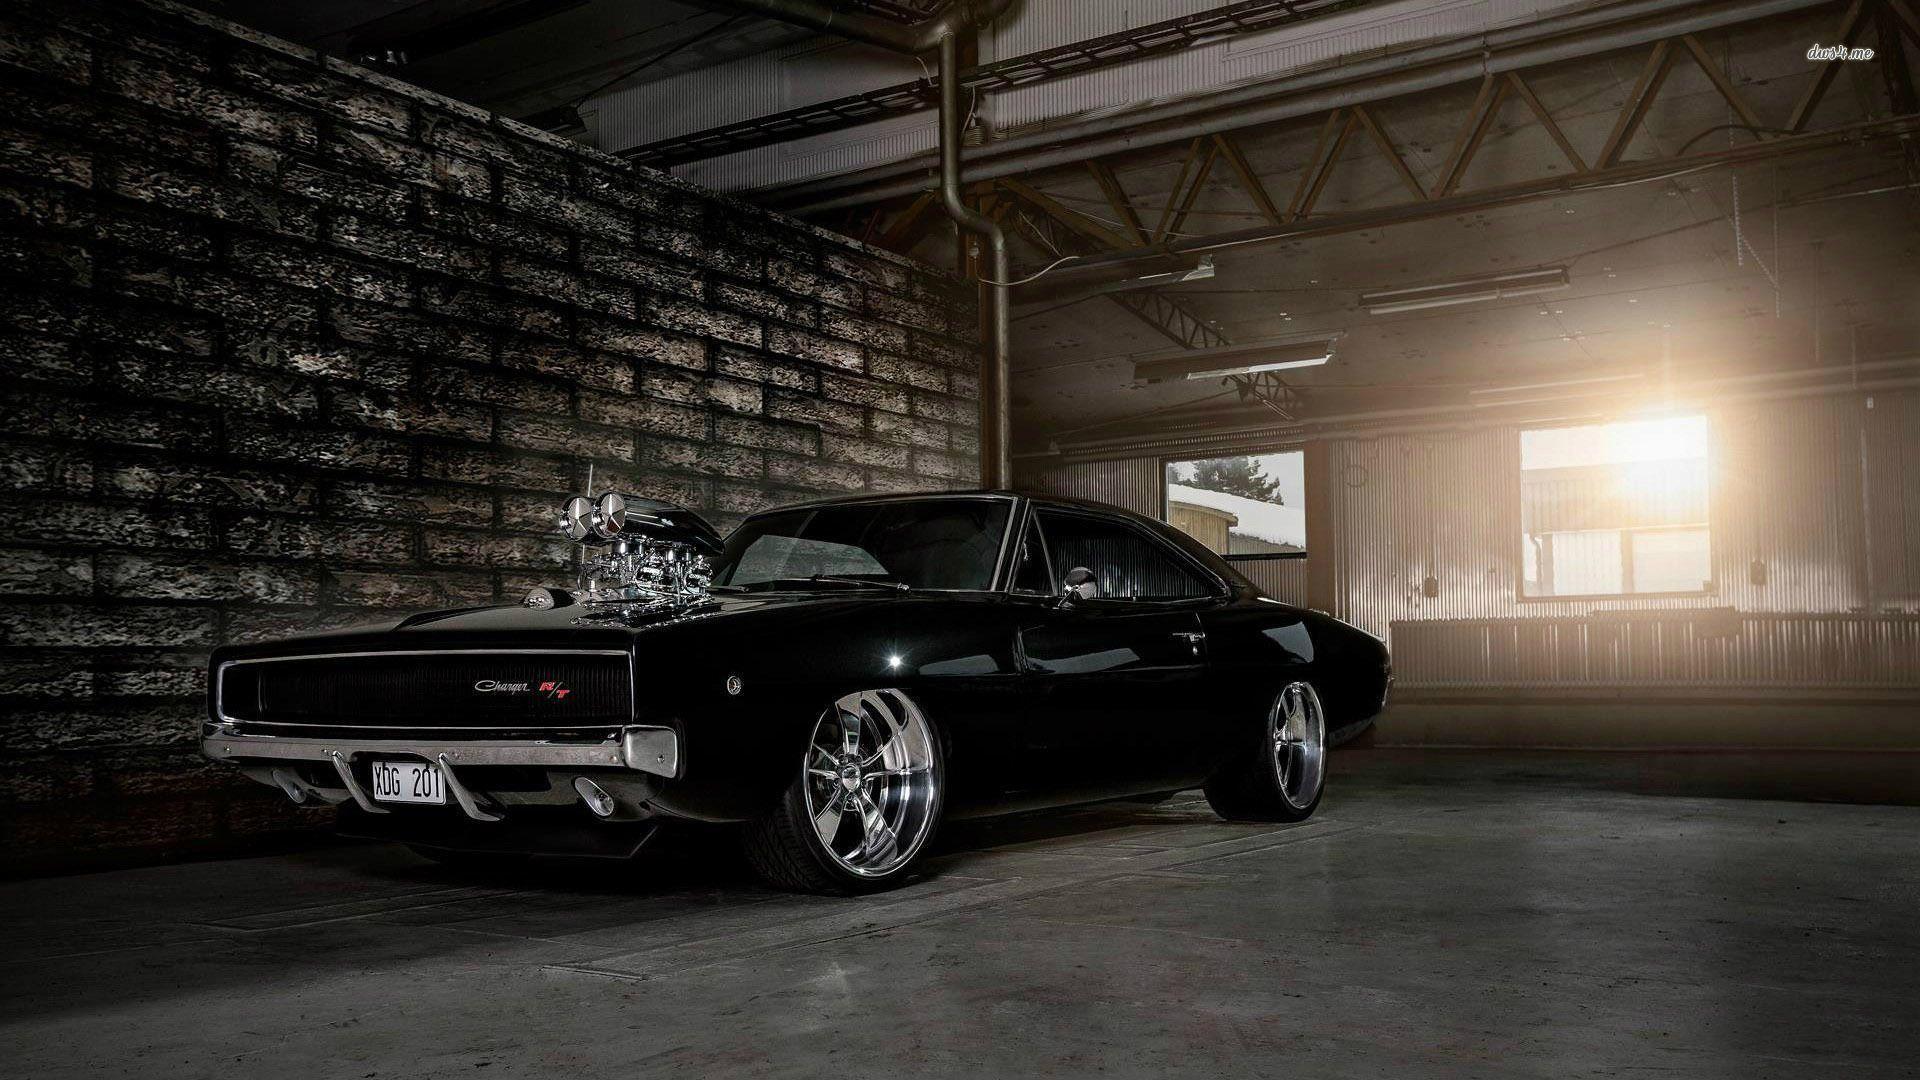 image For > 1969 Dodge Charger Rt Wallpaper